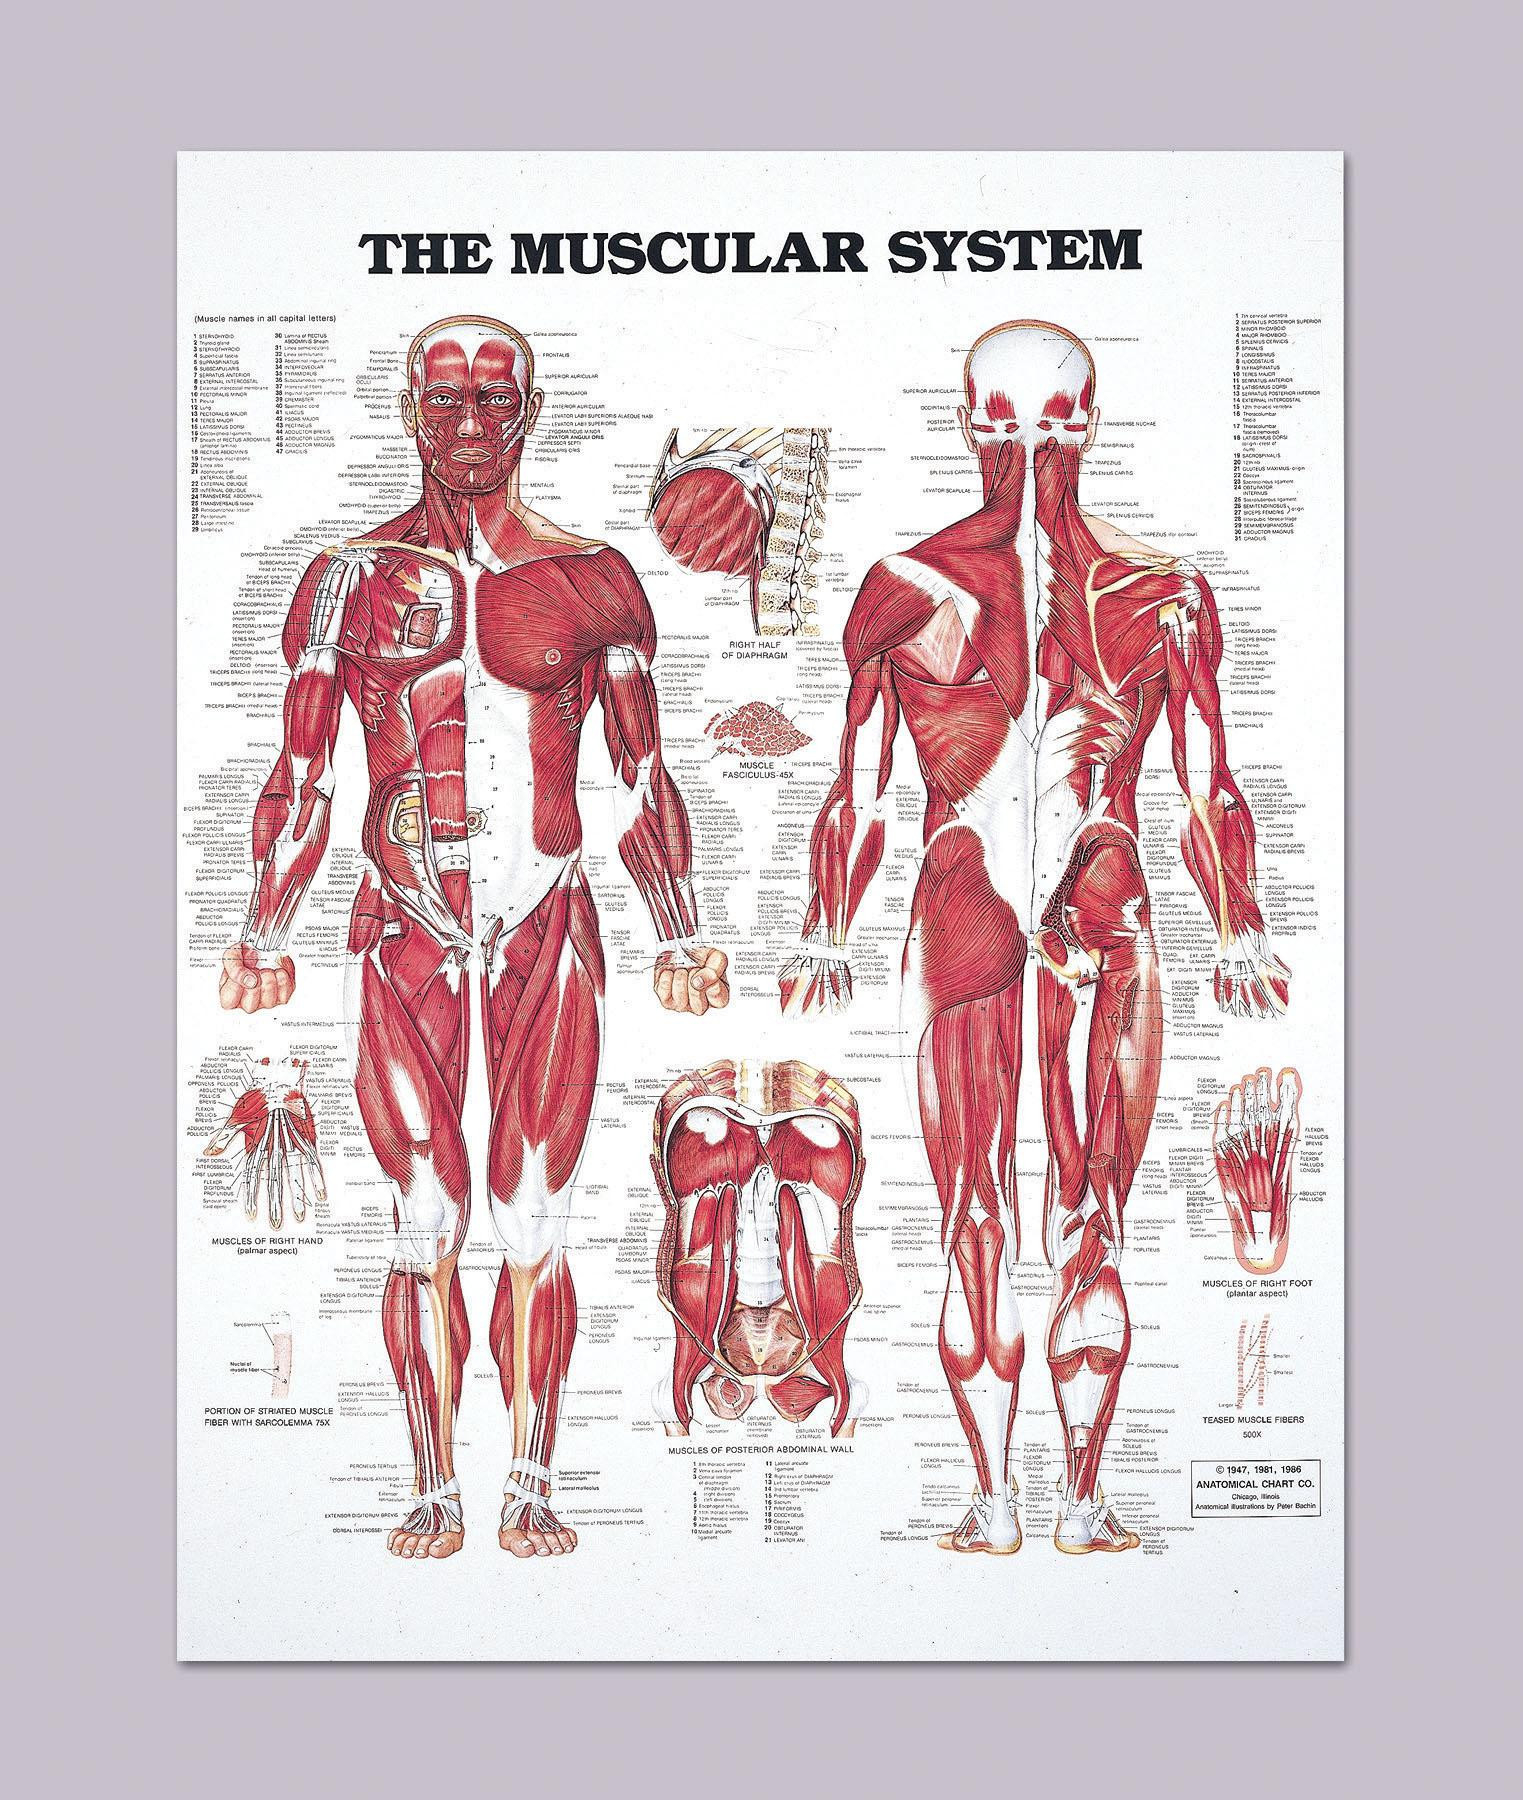 Muscular System Diagram The Human Muscular System Anatomy Detailed Diagram 20 Wide X 26 High